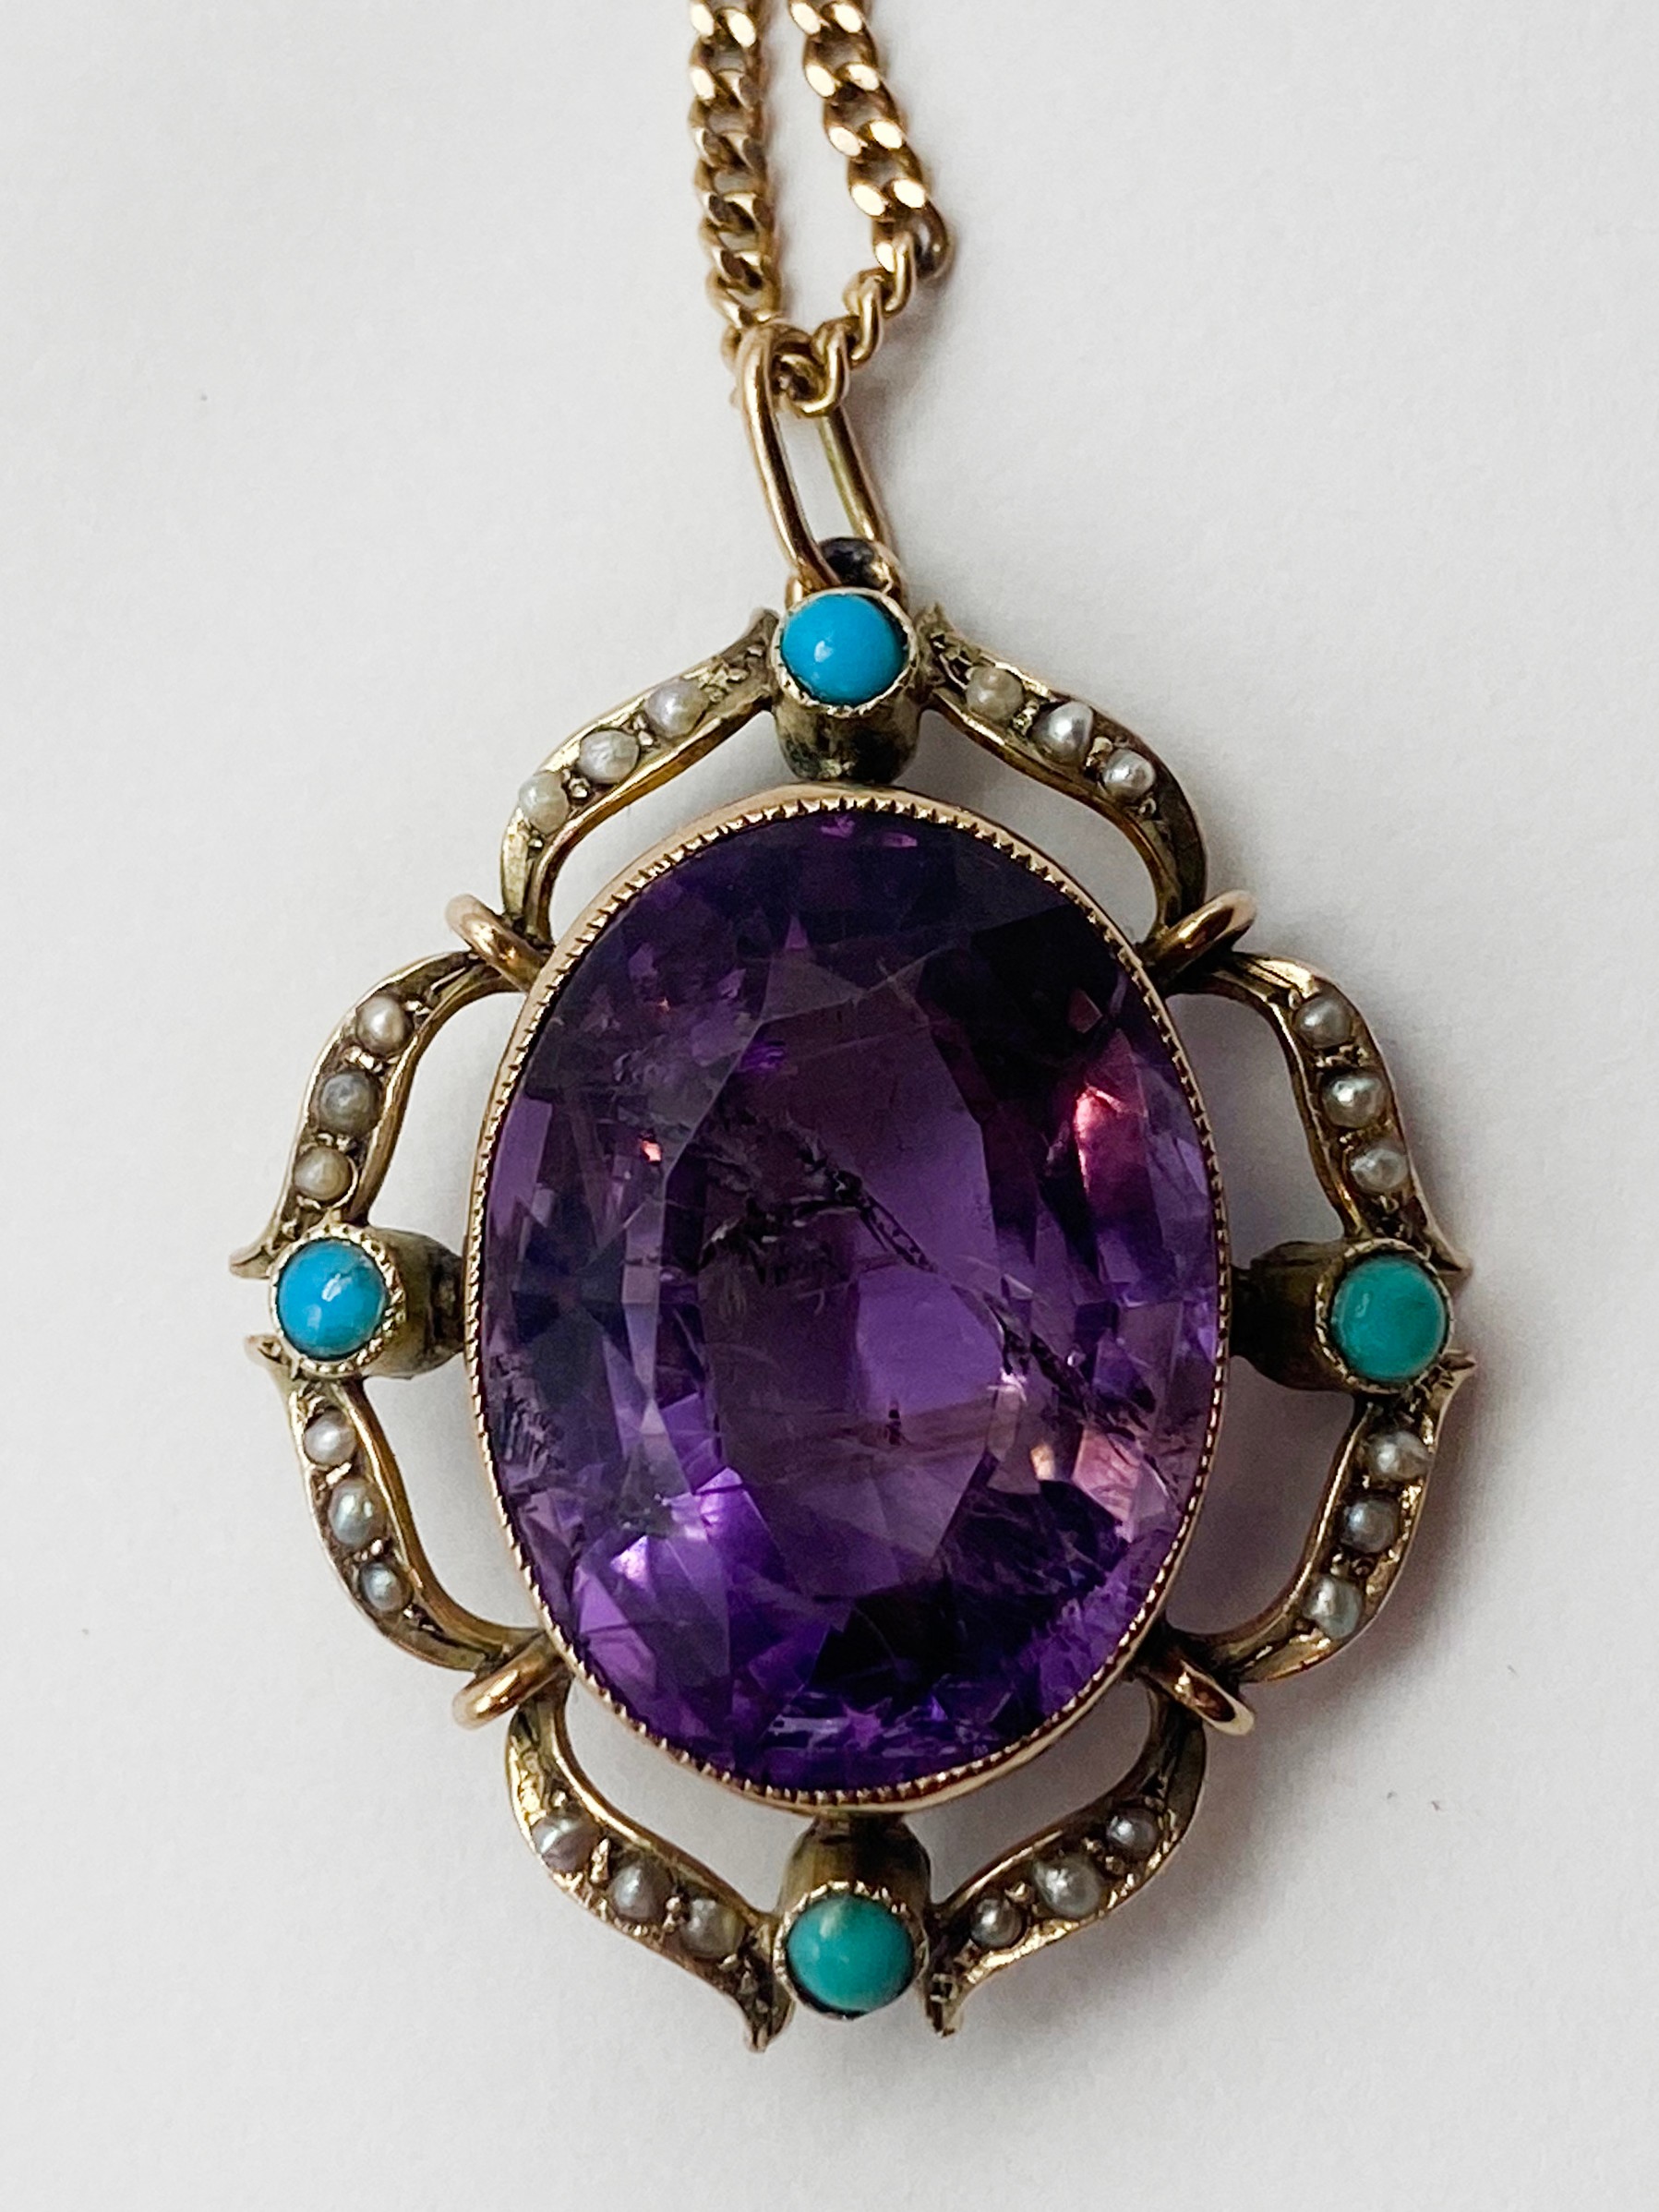 9CT GOLD AMETHYST, TURQUOISE & SEED PEAL PENDANT AND CHAIN - Image 3 of 4